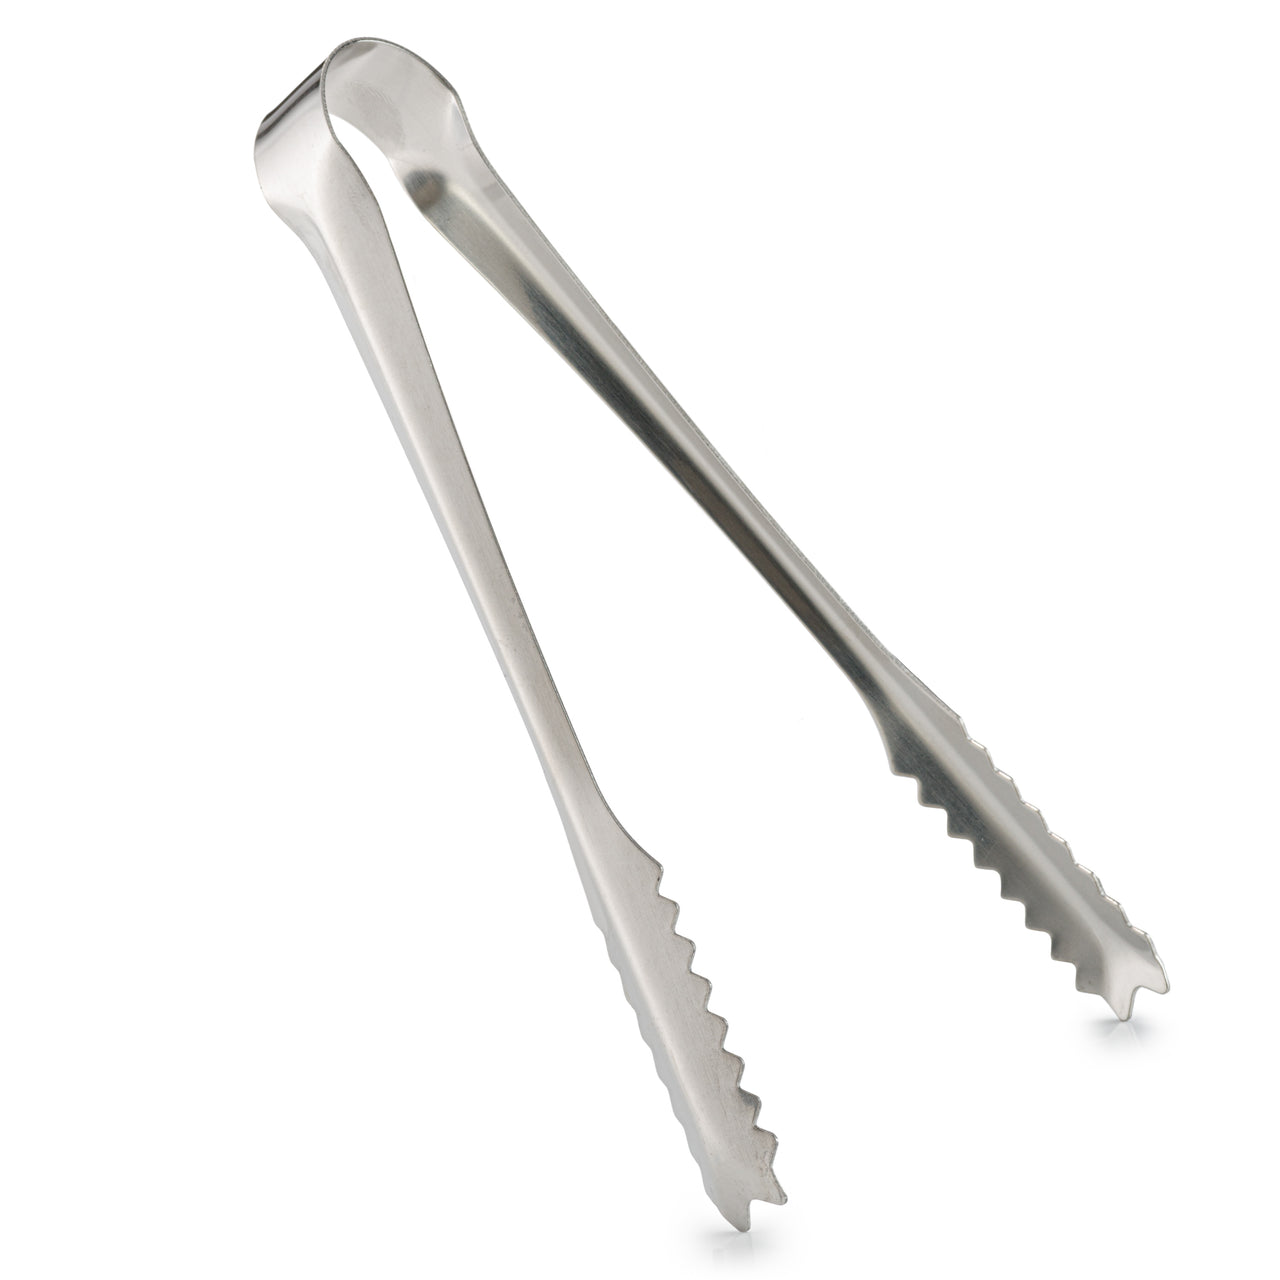 Barcool Ice Tongs 15cm Stainless Steel